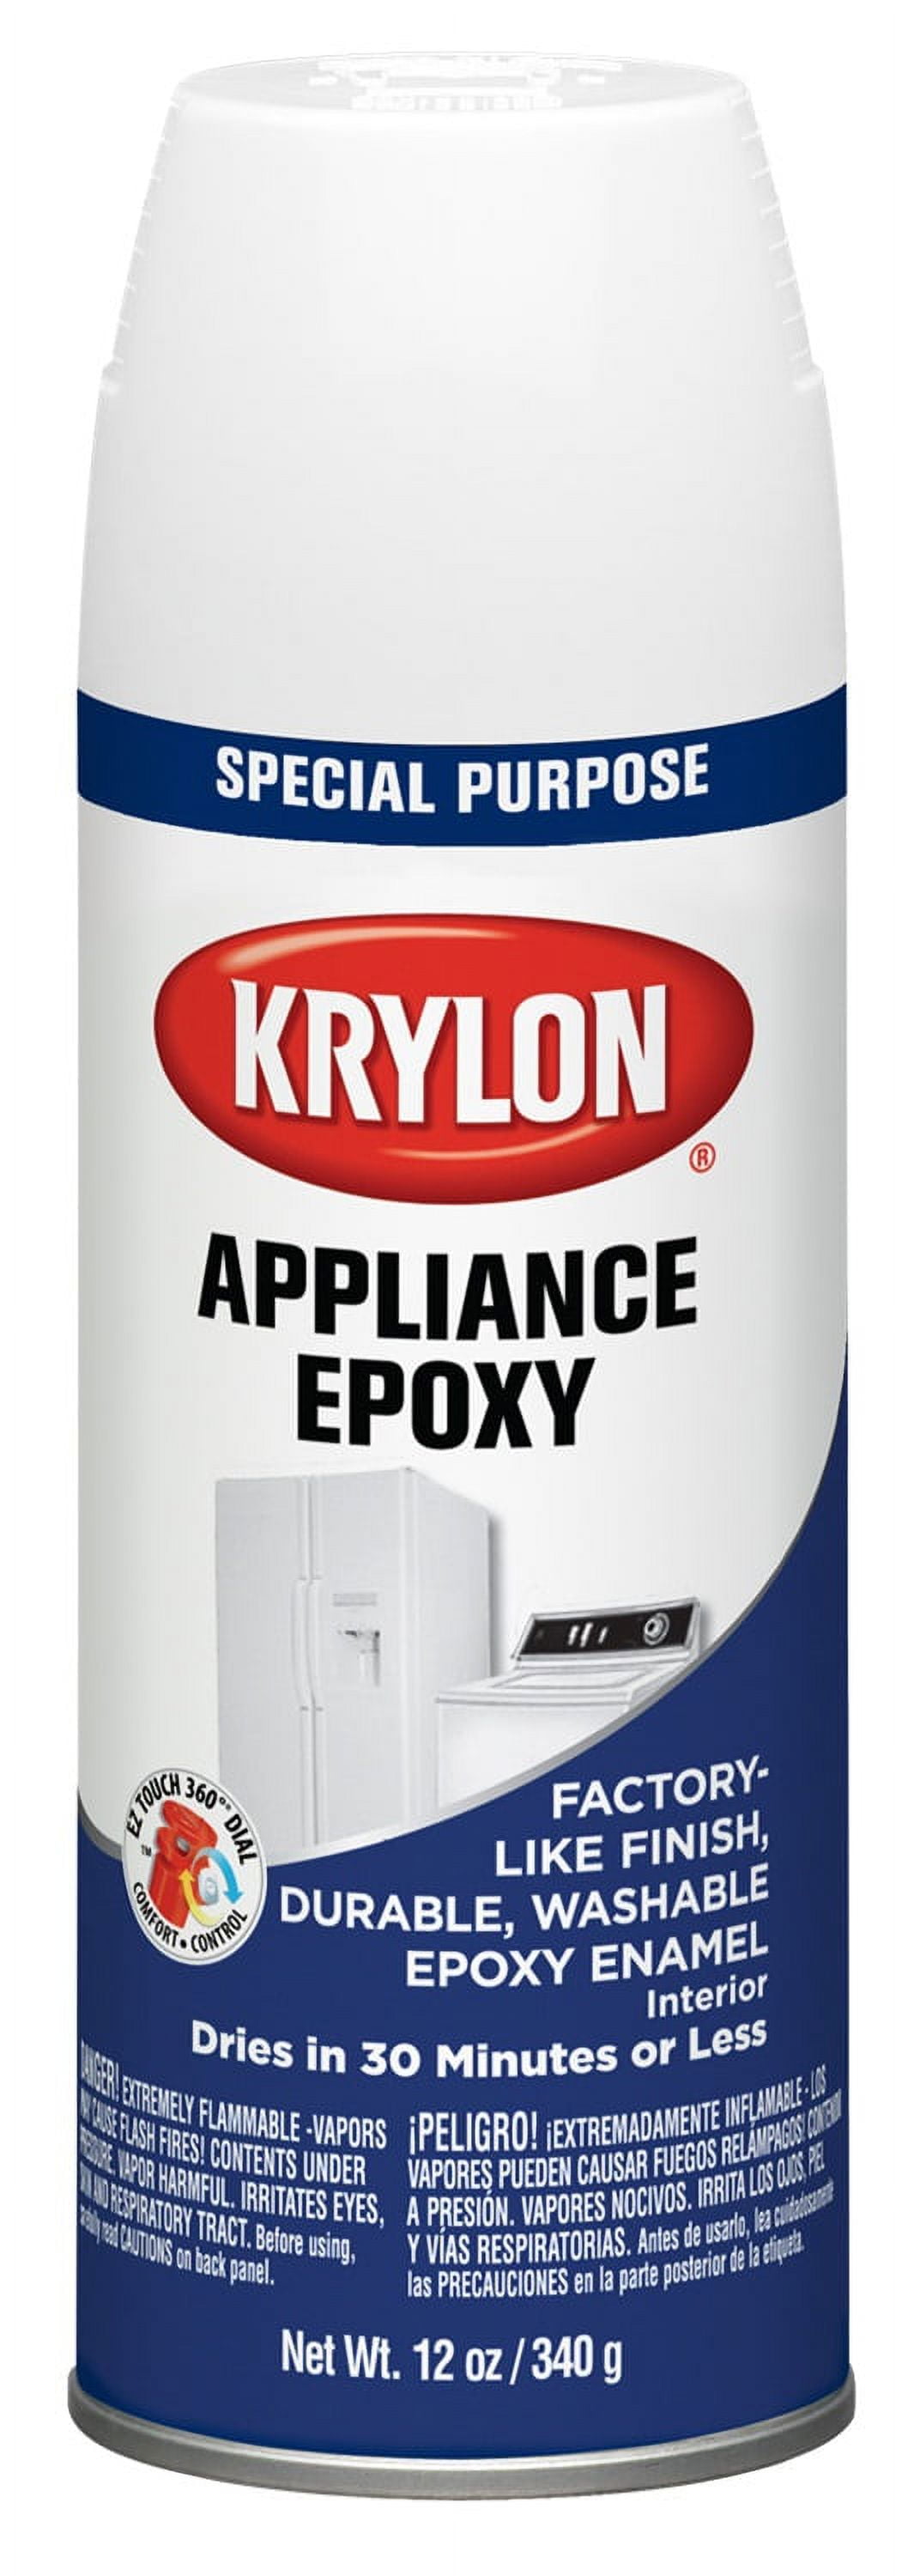 Question on using Appliance Epoxy Spray Paint